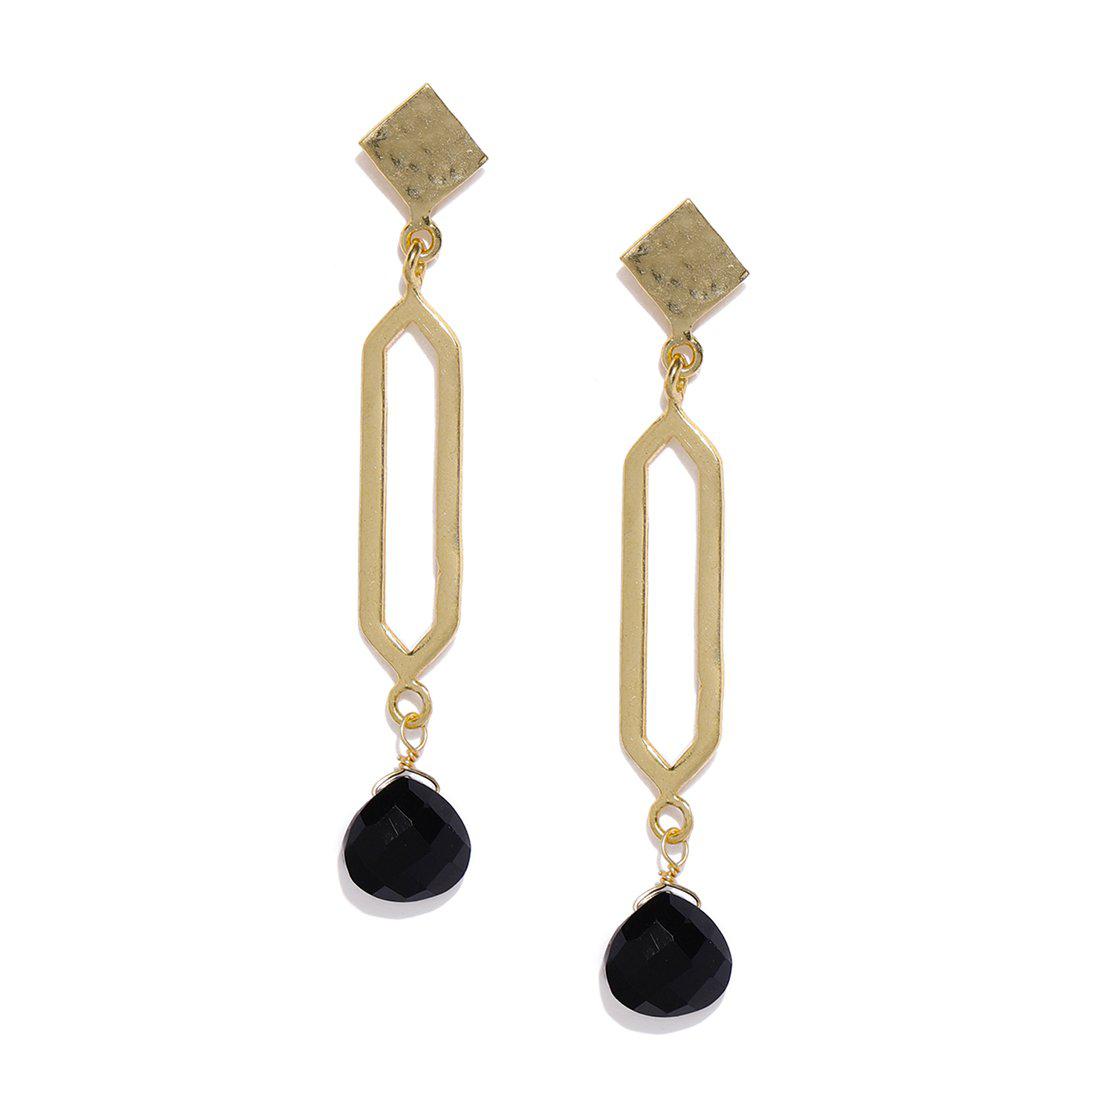 HANDCRAFTED BRASS HAMMERED GEOMETRIC DROP EARRINGS